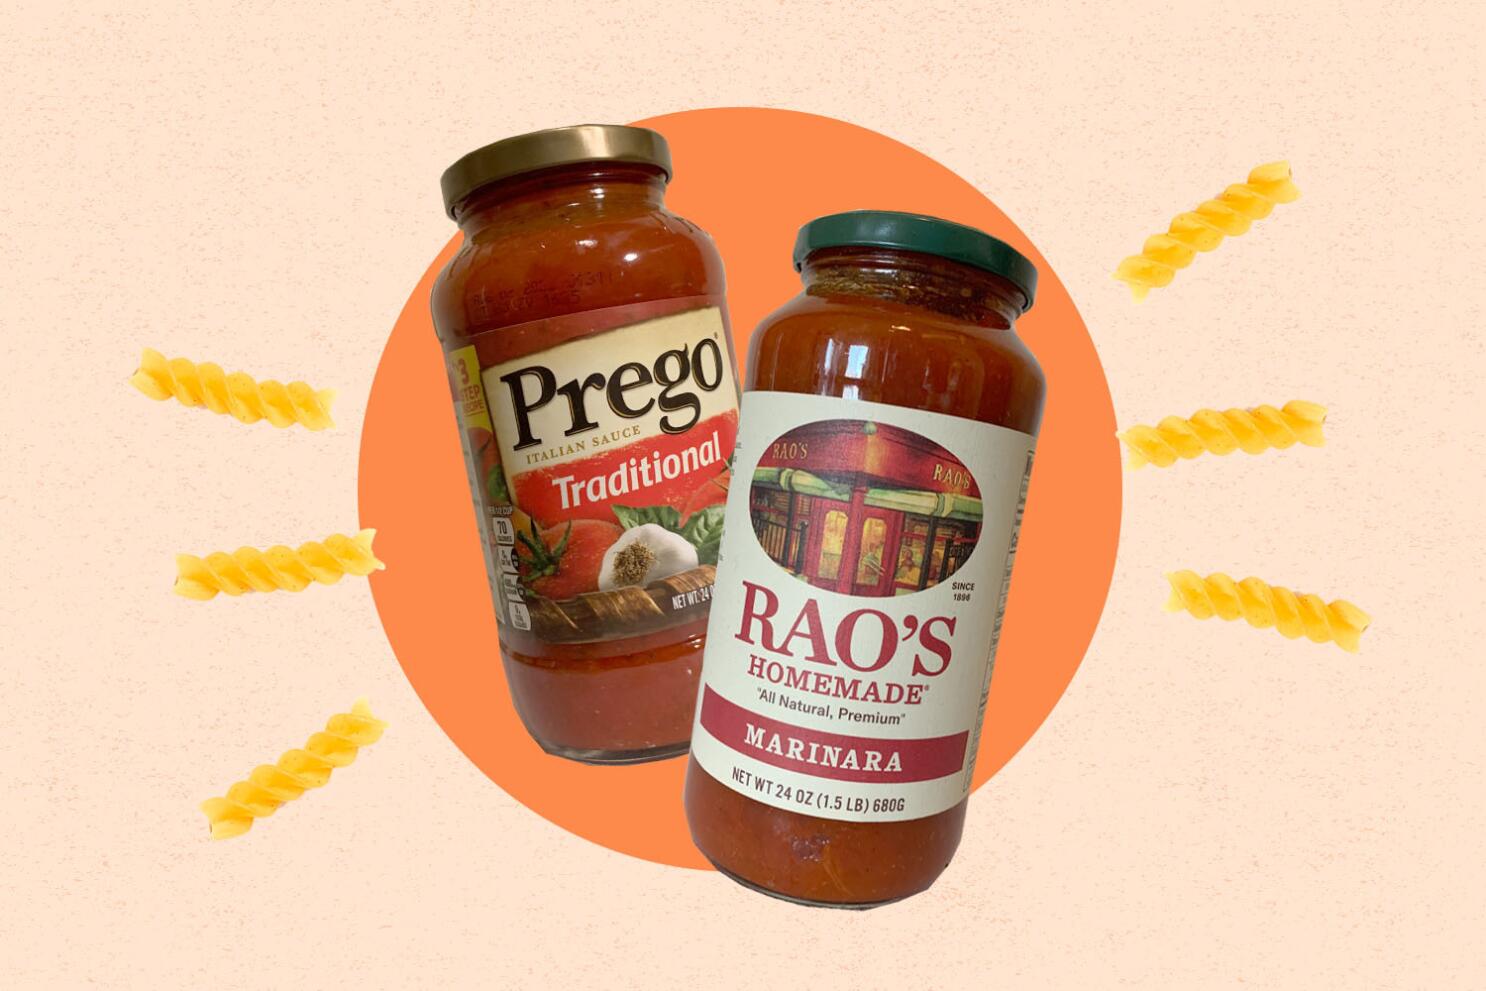 Jars of Rao's Recalled for Containing the Wrong Soup